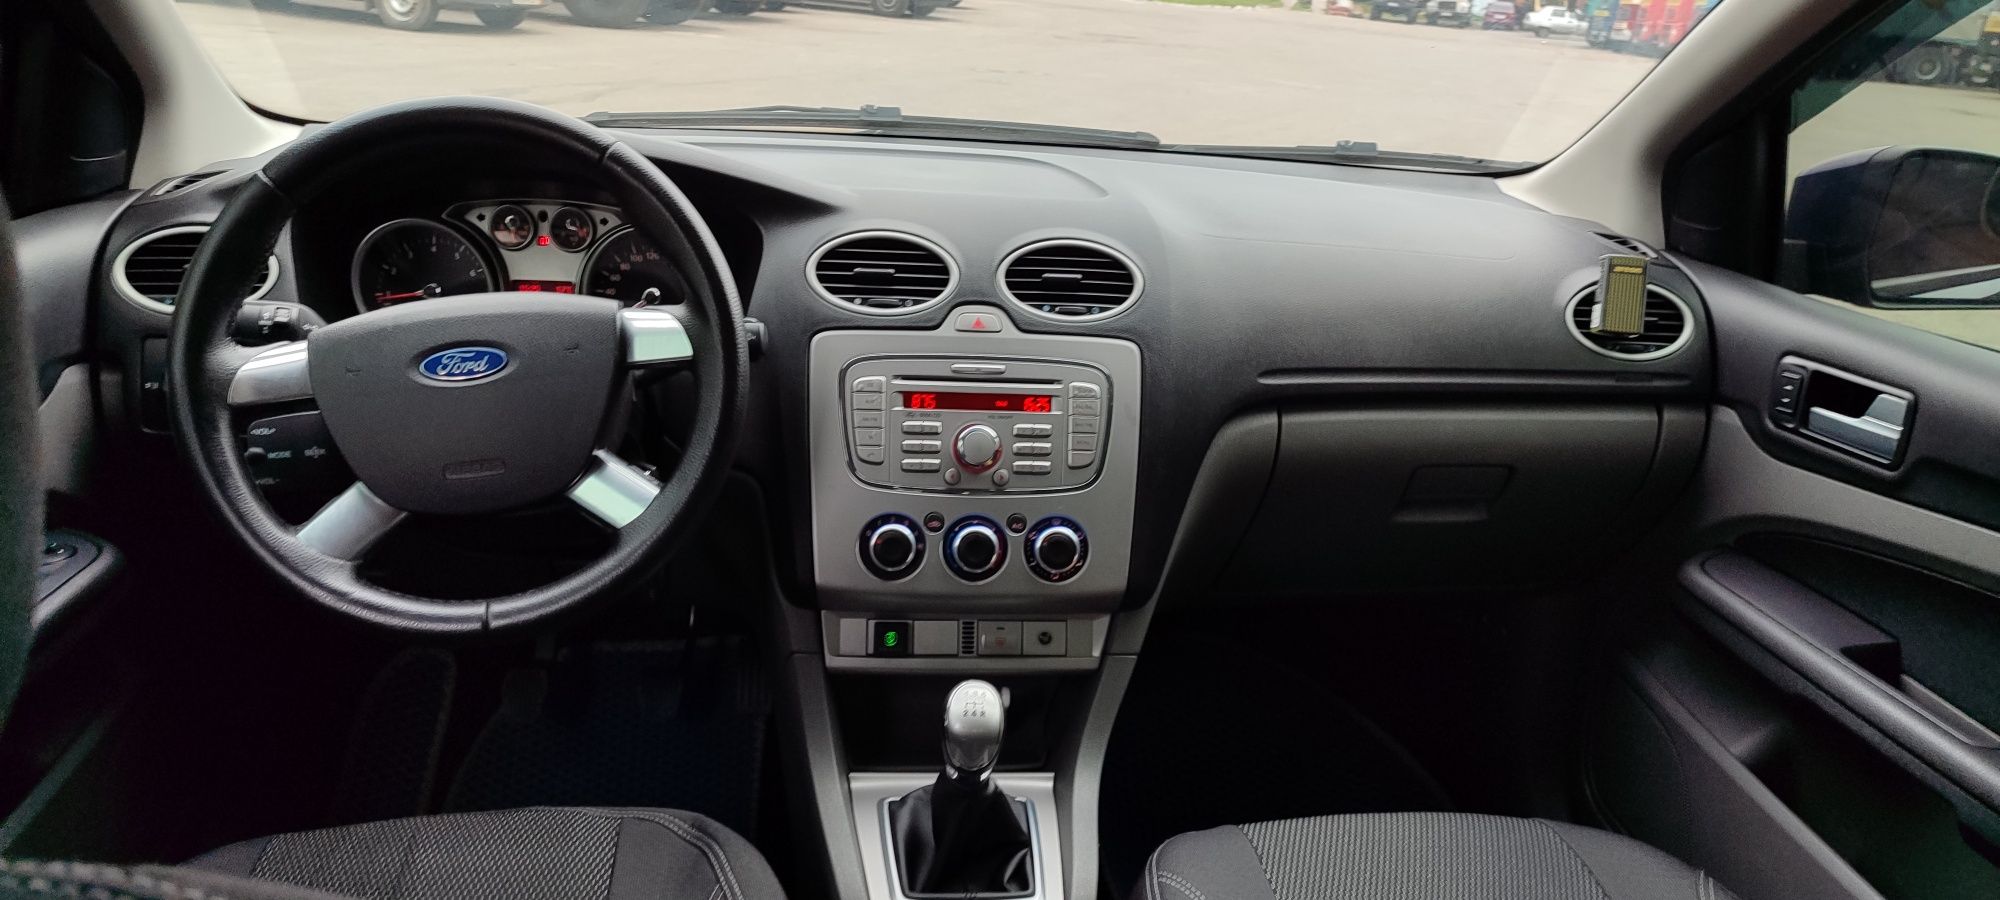 Ford Focus || 1.6 ГБО 4 2008 рік